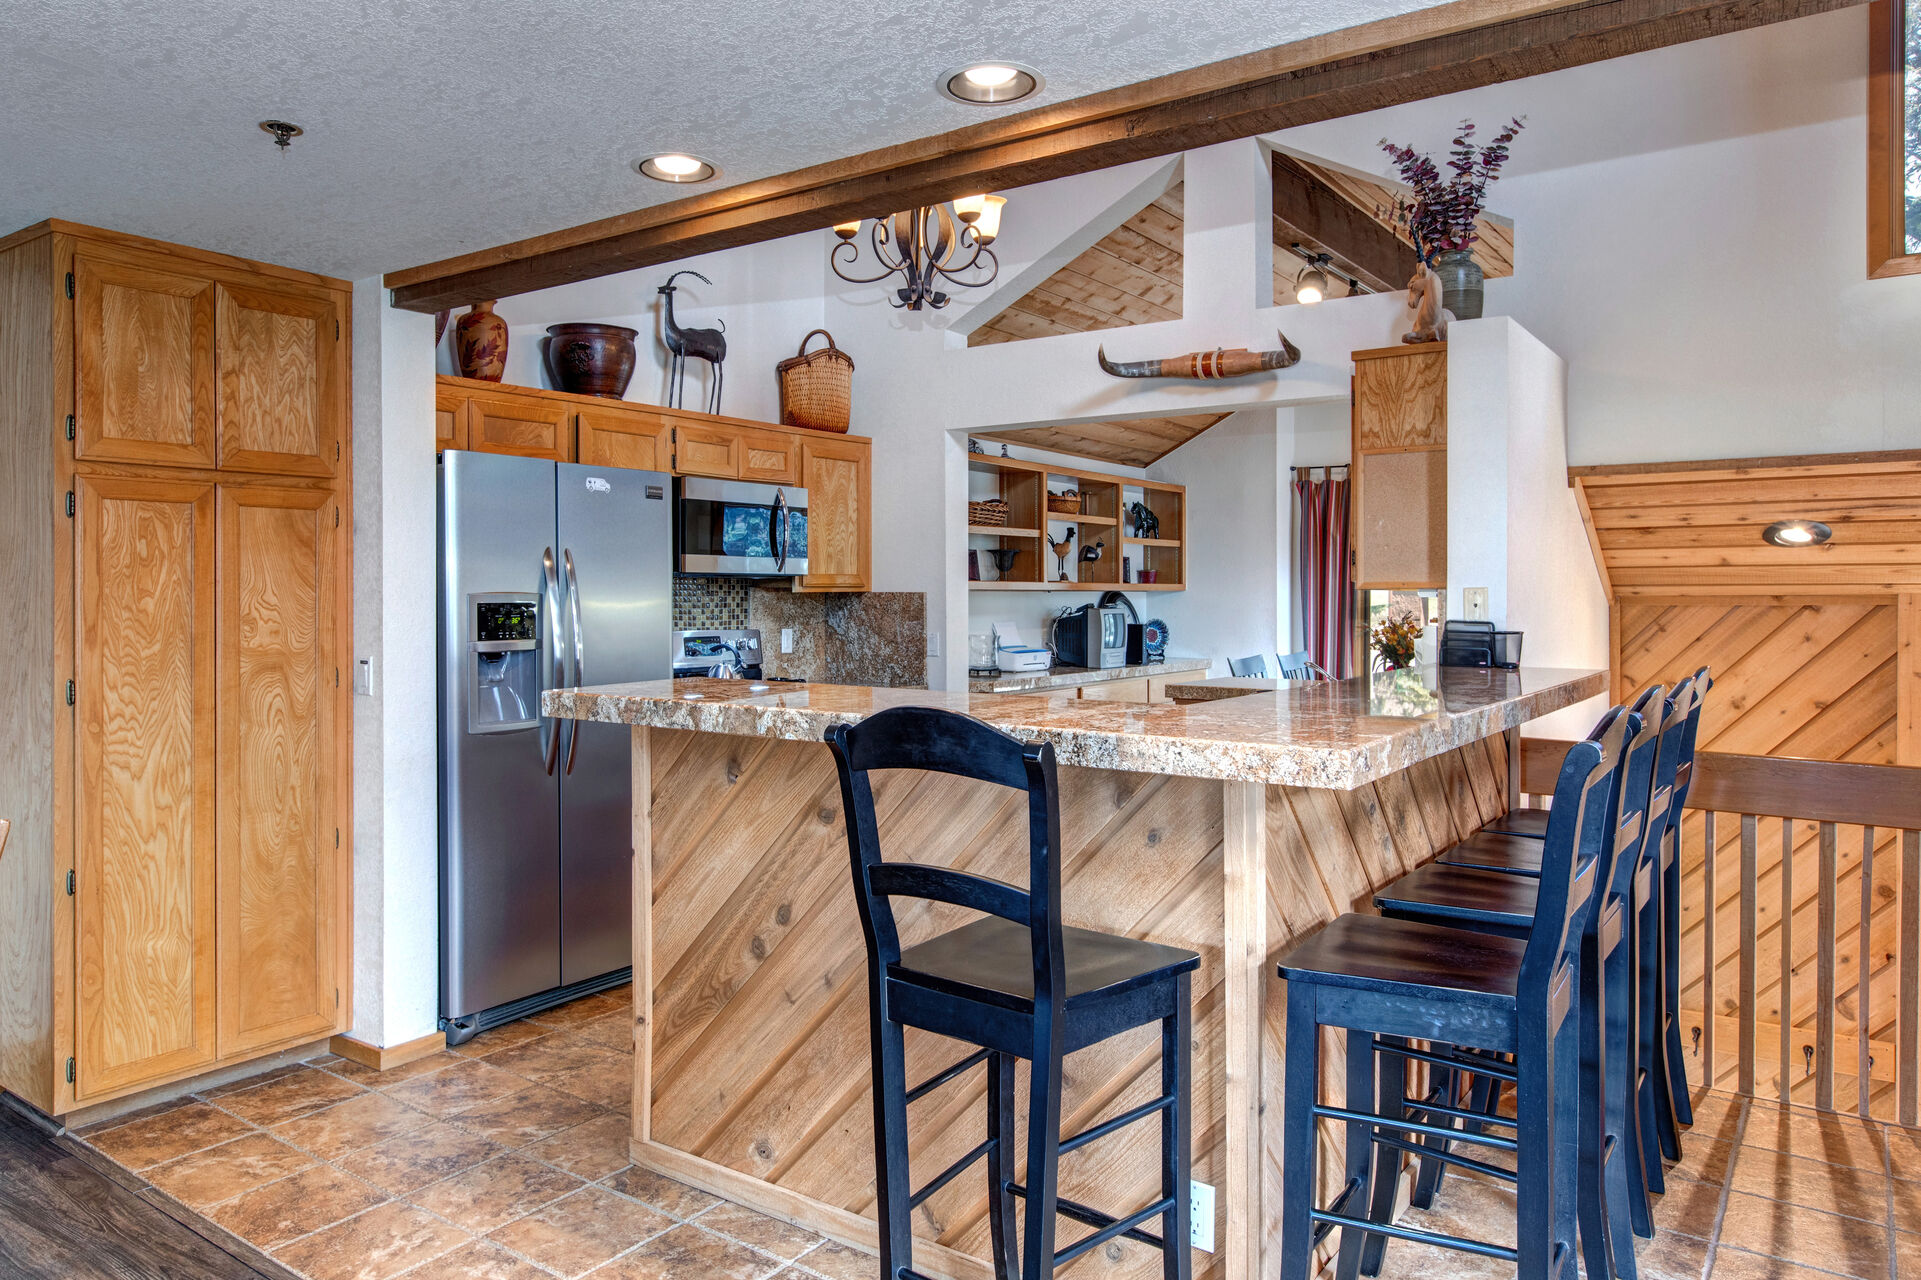 Fully Equipped Kitchen with stainless steel Frigidaire appliances, stone countertops, breakfast nook with seating for four, and bar seating for four